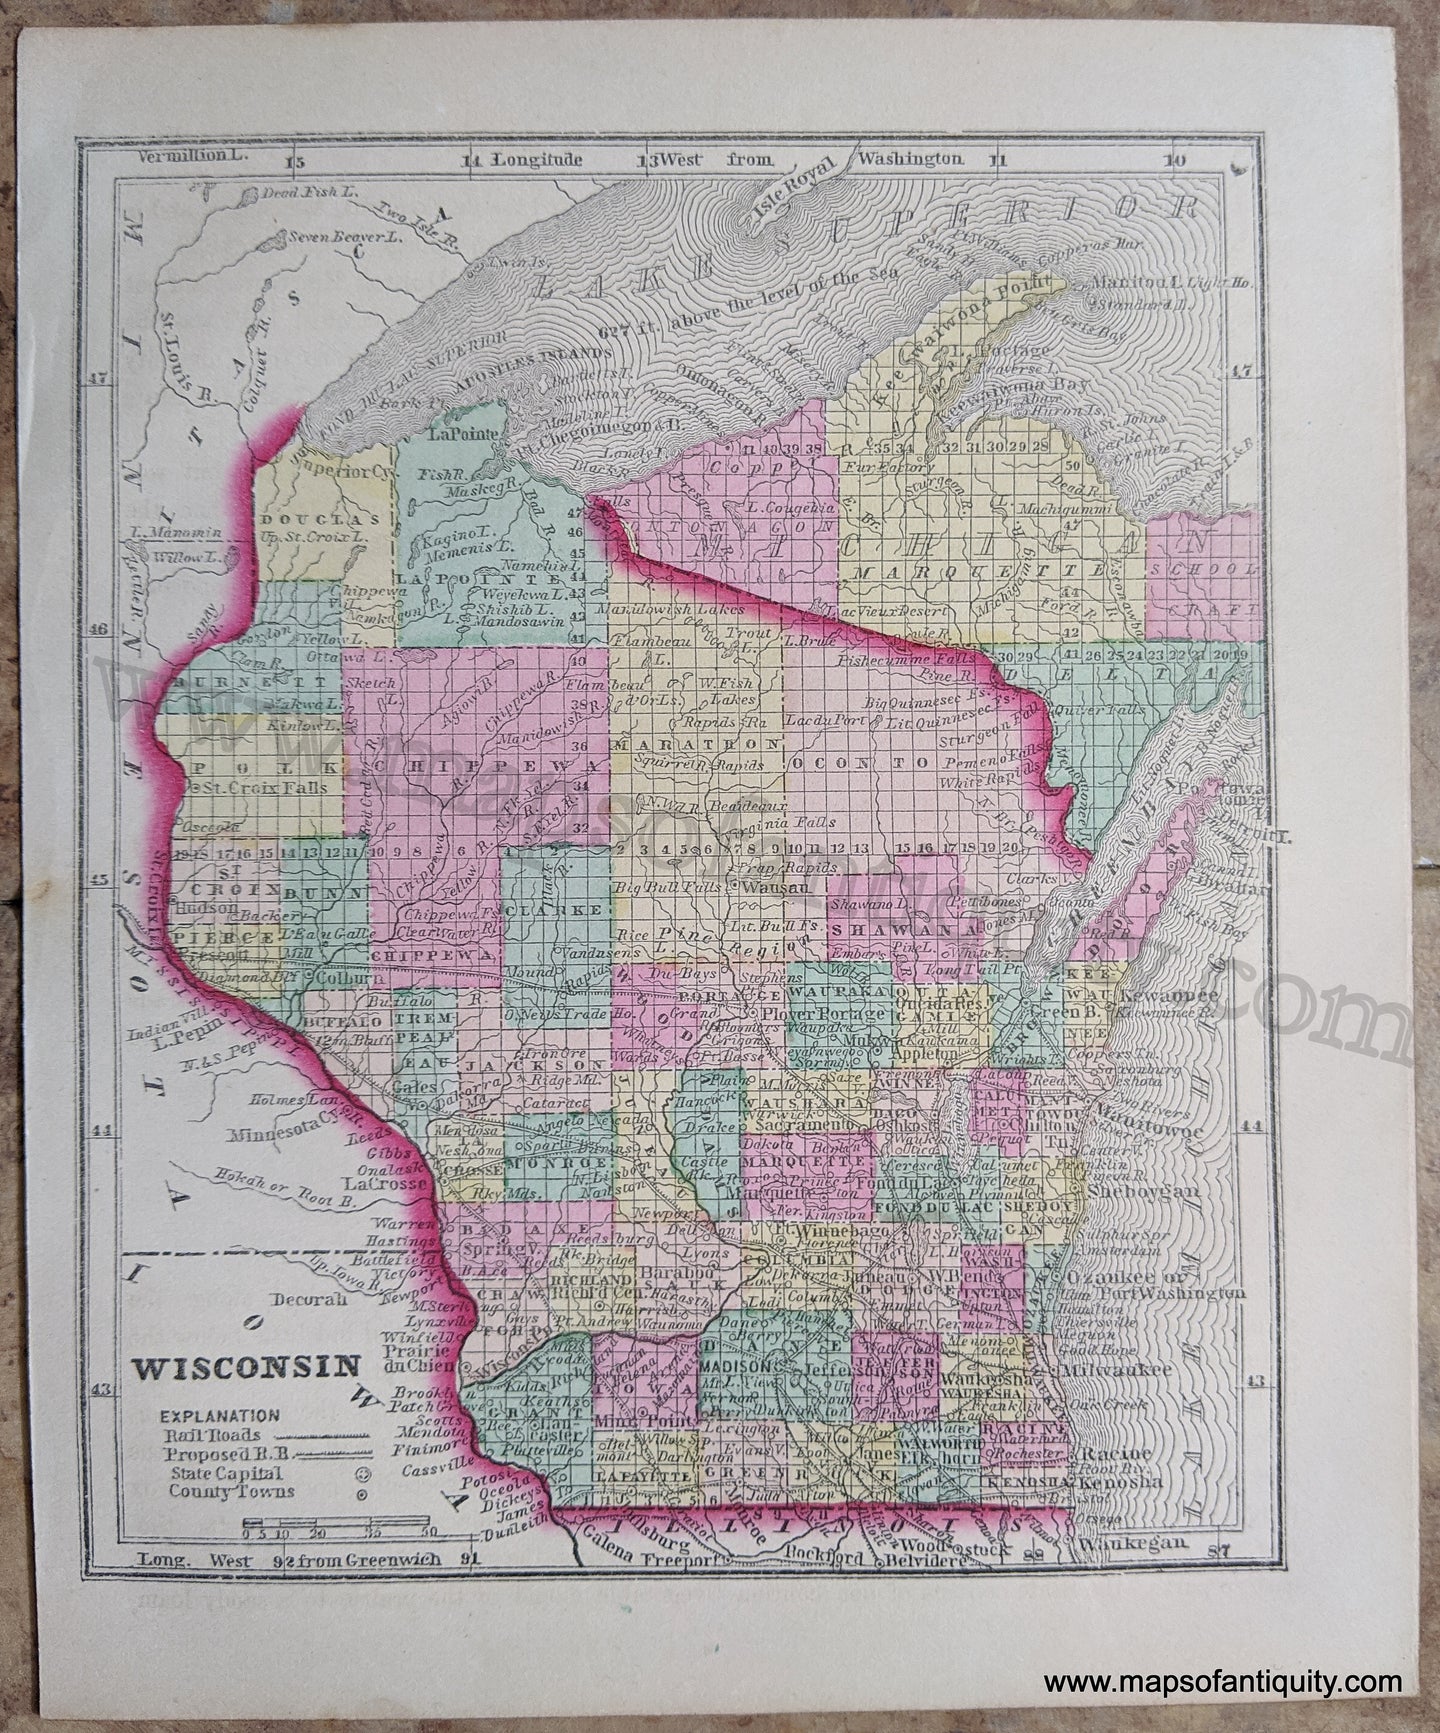 Antique-Hand-Colored-Map-Wisconsin-United-States-Midwest-1857-Morse-and-Gaston-Maps-Of-Antiquity-1800s-19th-century